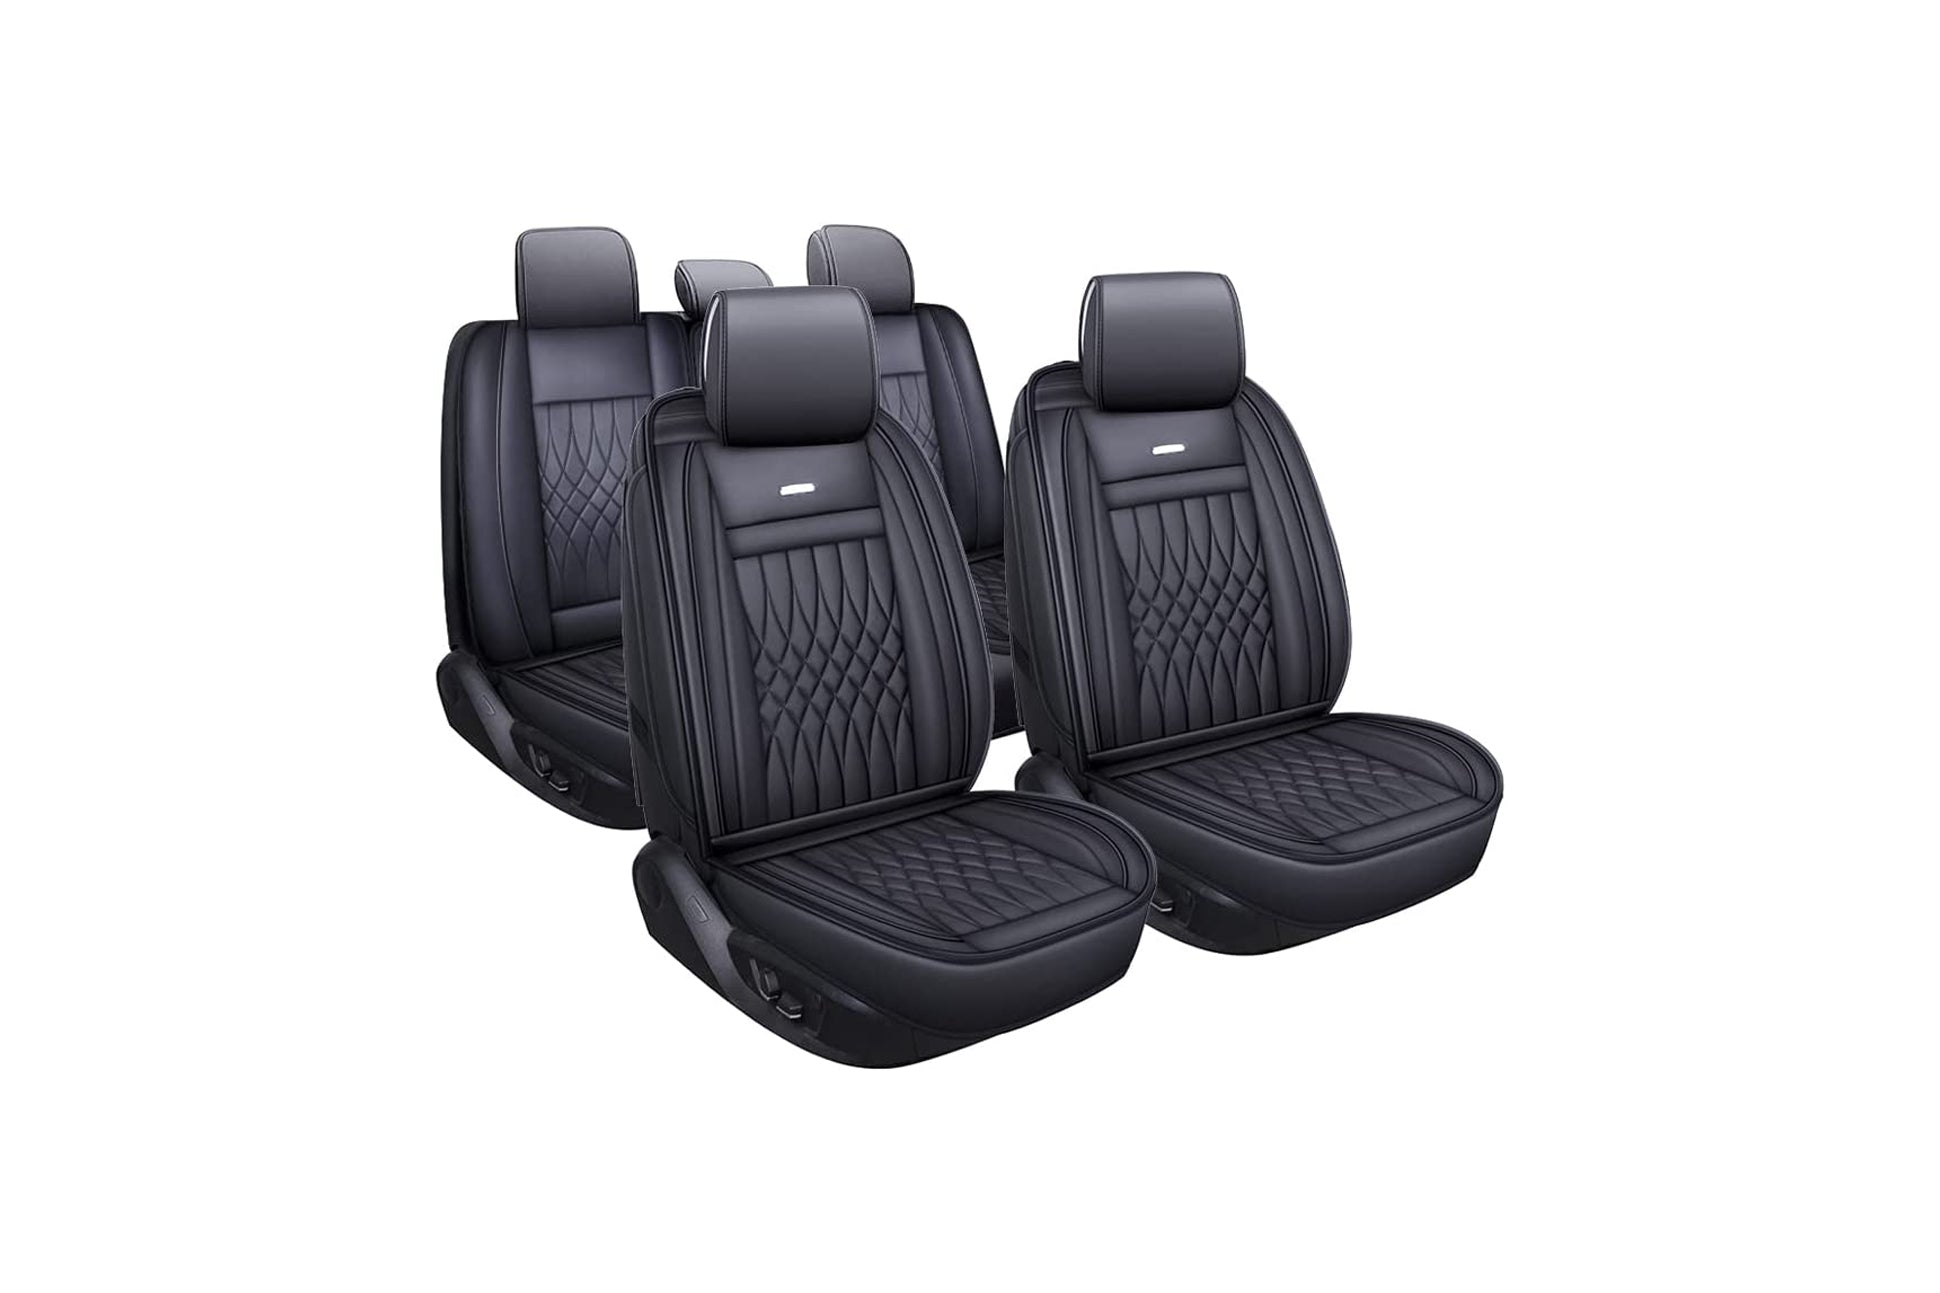 BMW Seat Covers - Protecting Your Interior Investment